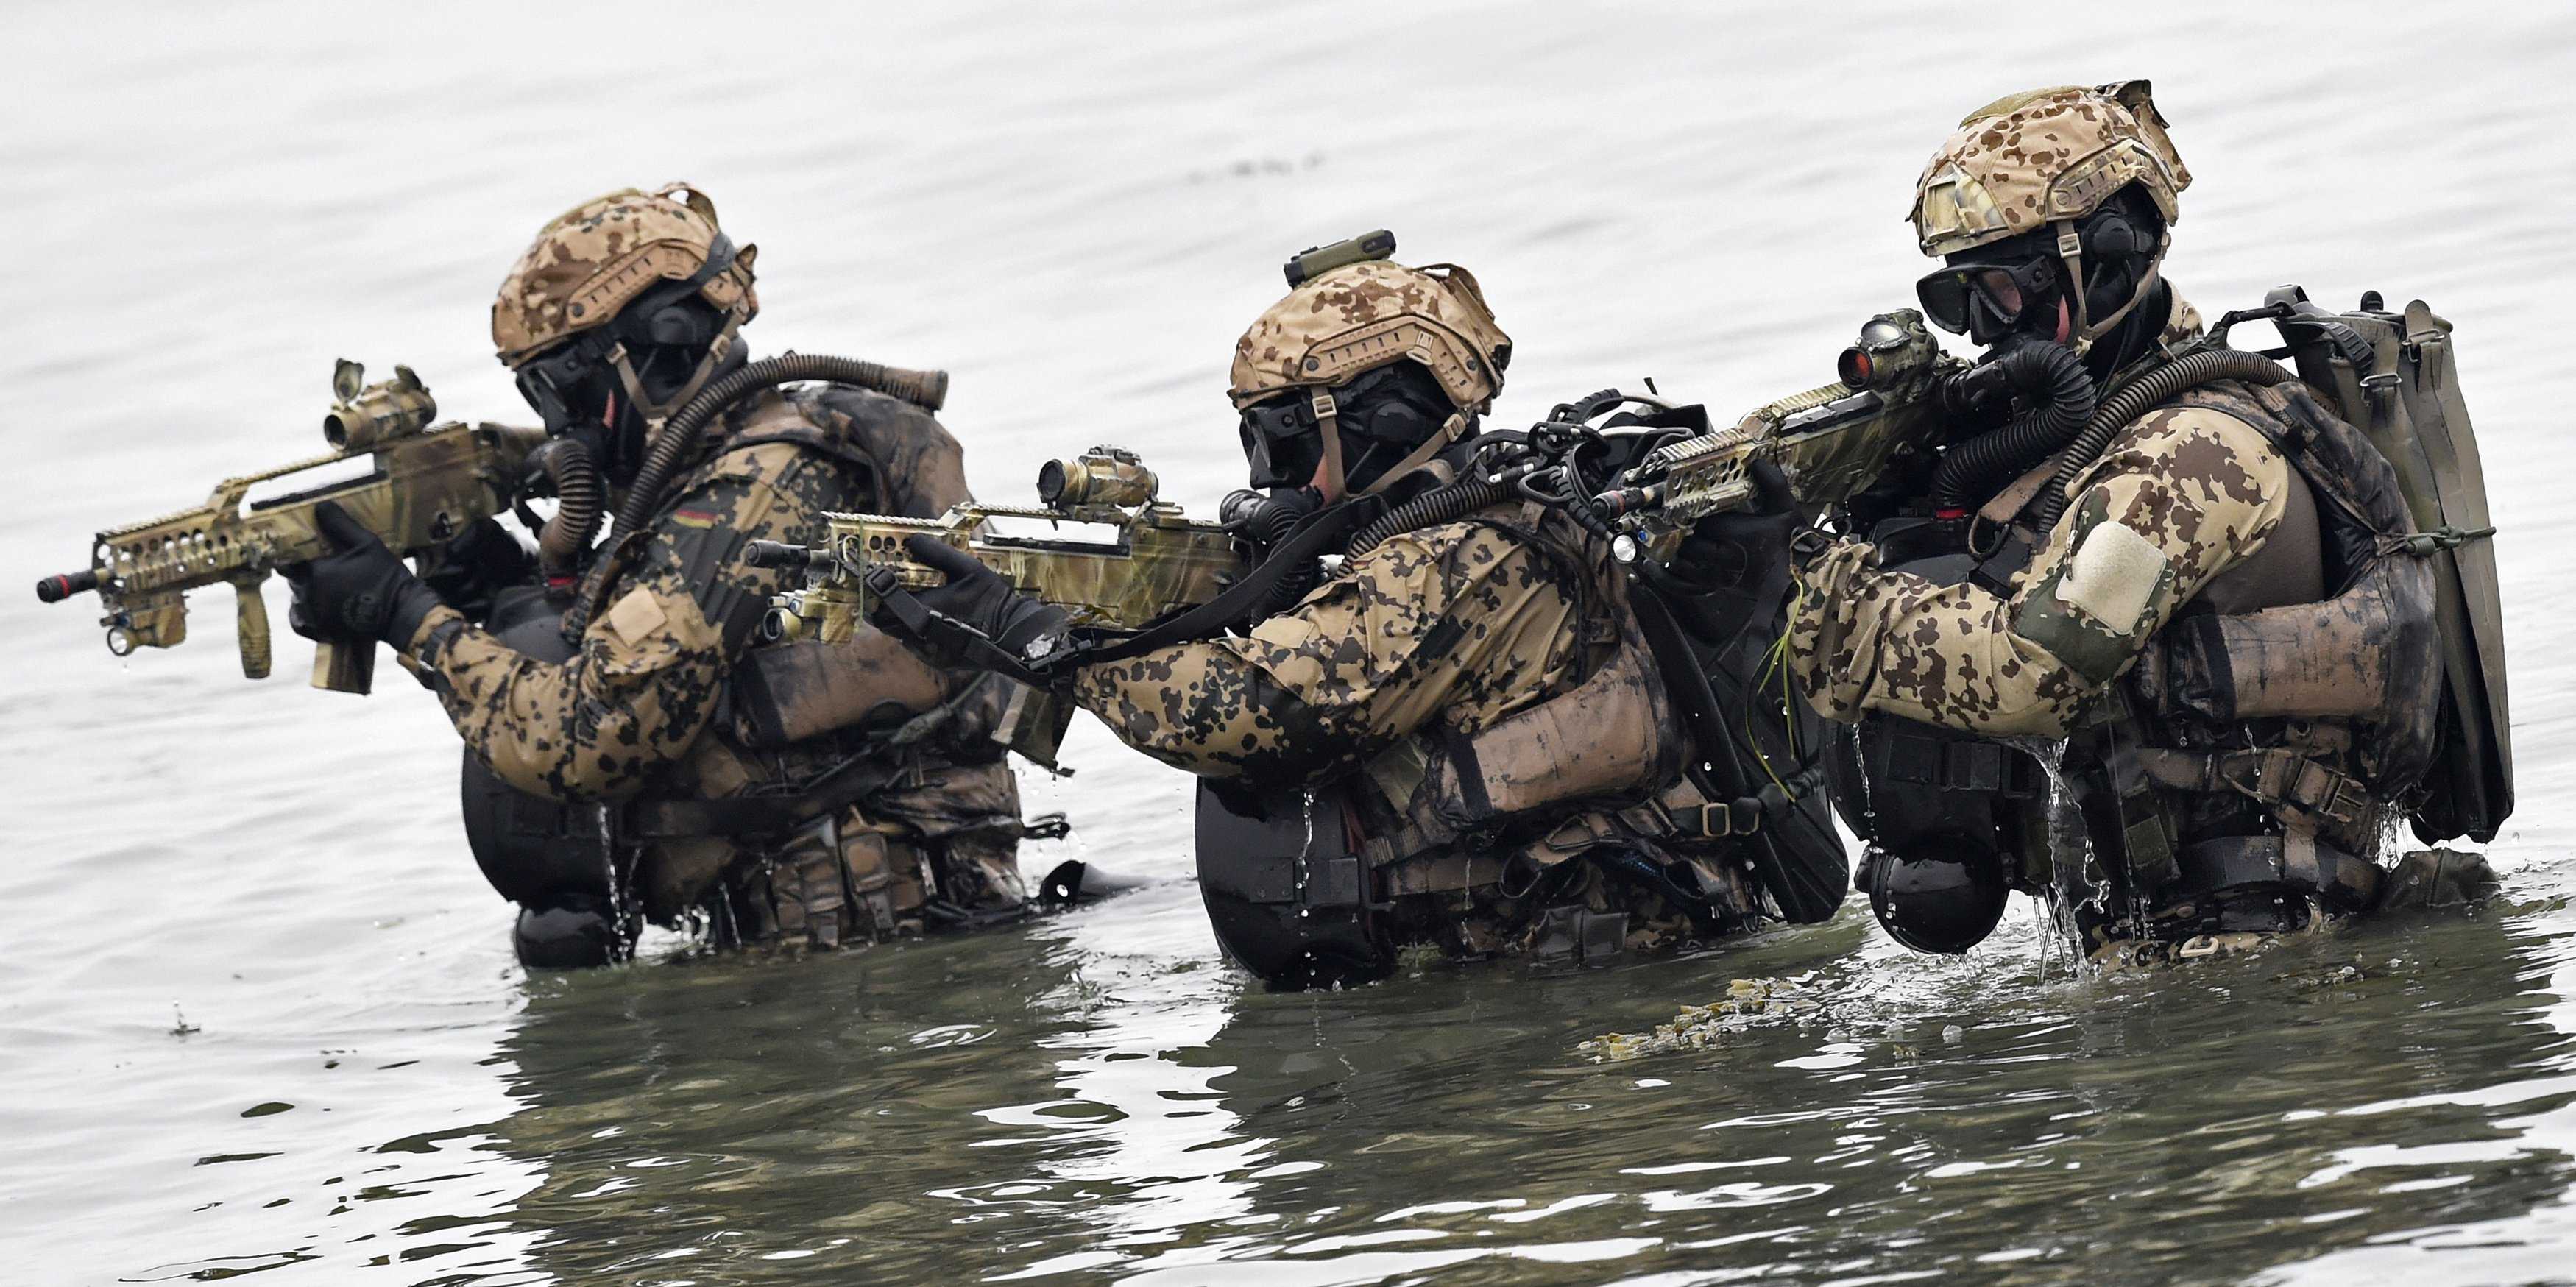 Special forces wallpaper Gallery